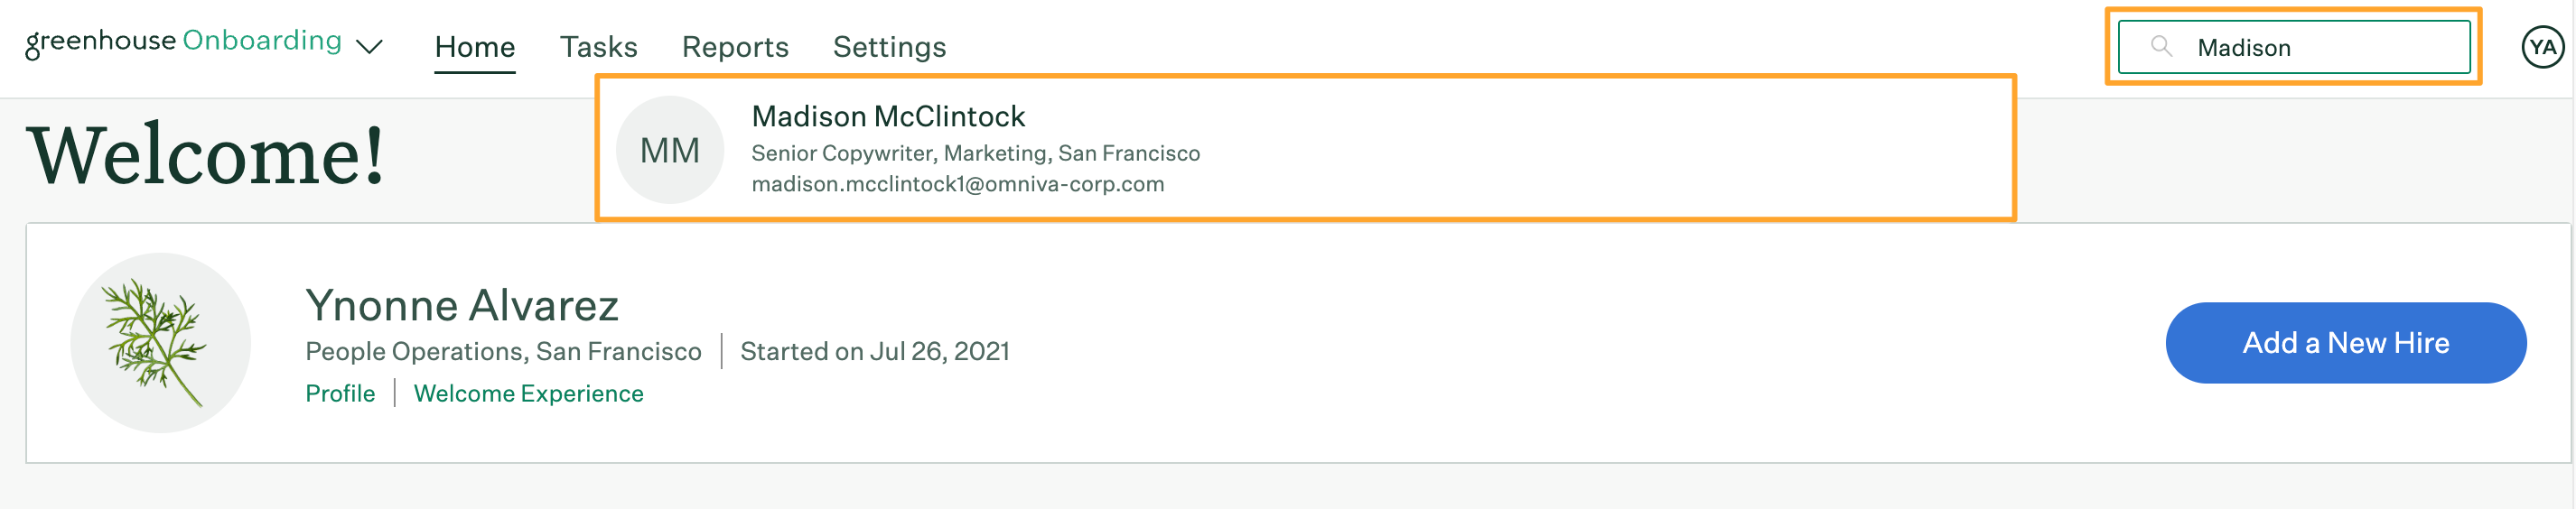 Screenshot-of-employee-search-on-Greenhouse-Onboarding-home-page.png